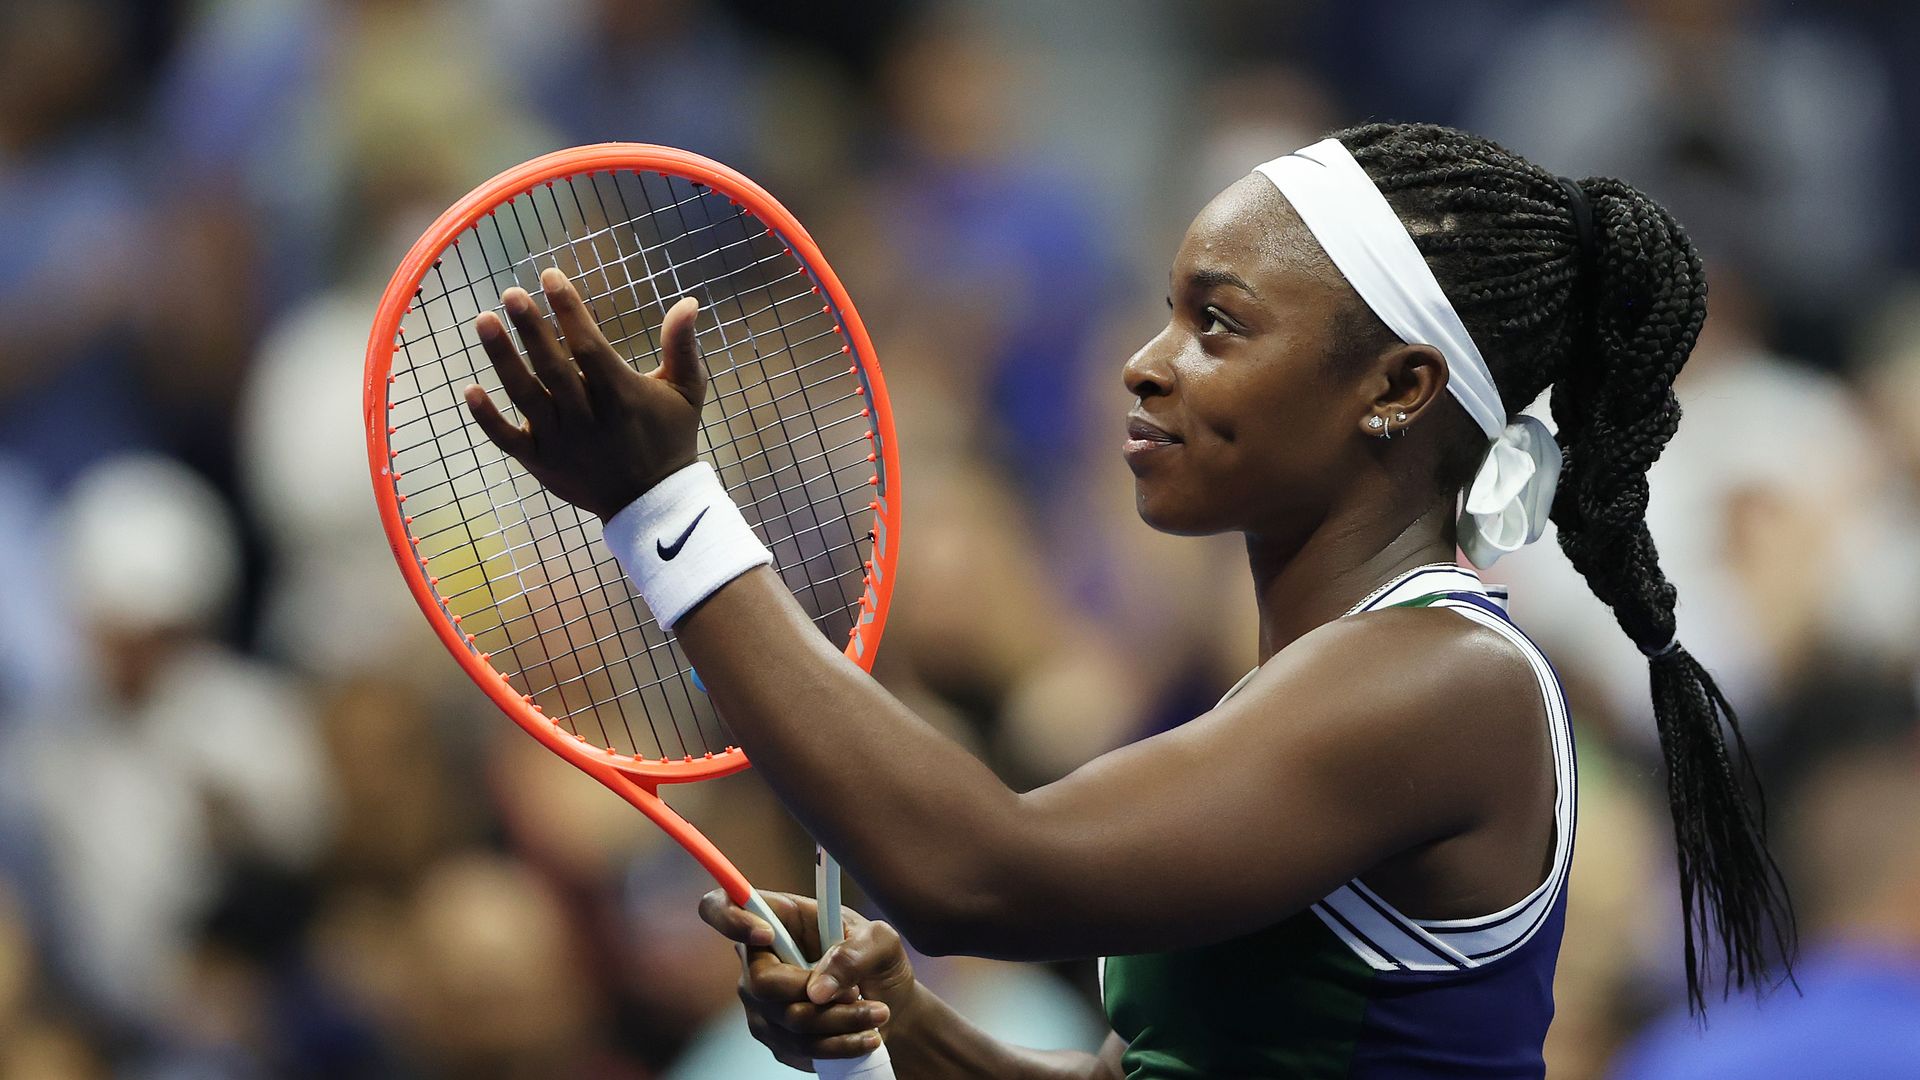 Sloane Stephens at the U.S. Open 